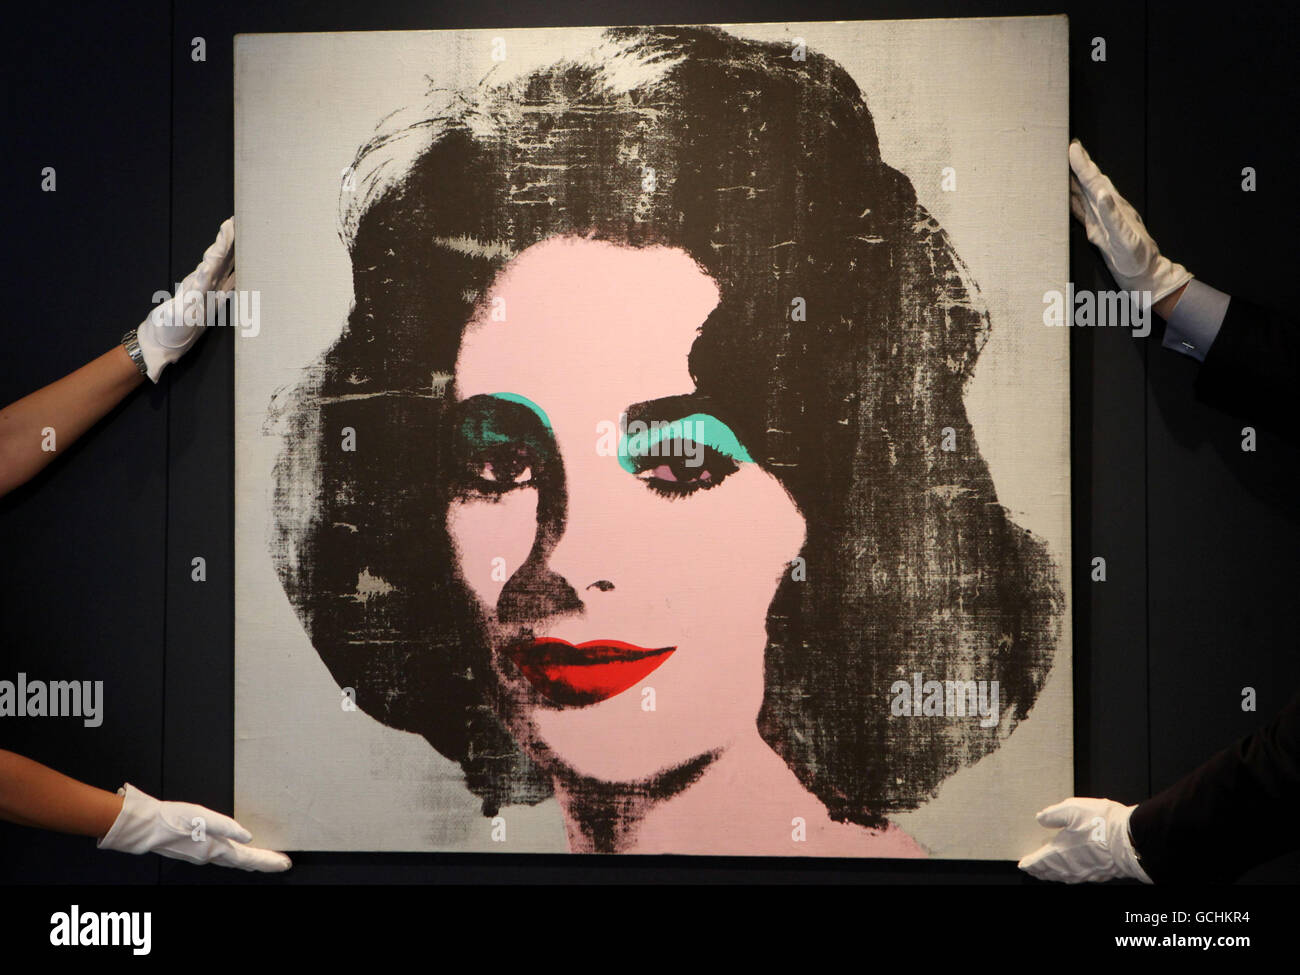 'Silver Liz, 1963', a rare Andy Warhol portrait of Elizabeth Taylor which has been unseen in public for over 20 years and is estimated to fetch between 6 and 8 million pounds when it goes under the hammer on June 30 as part of Christie's Post War and Contemporary Art Evening auction. Stock Photo